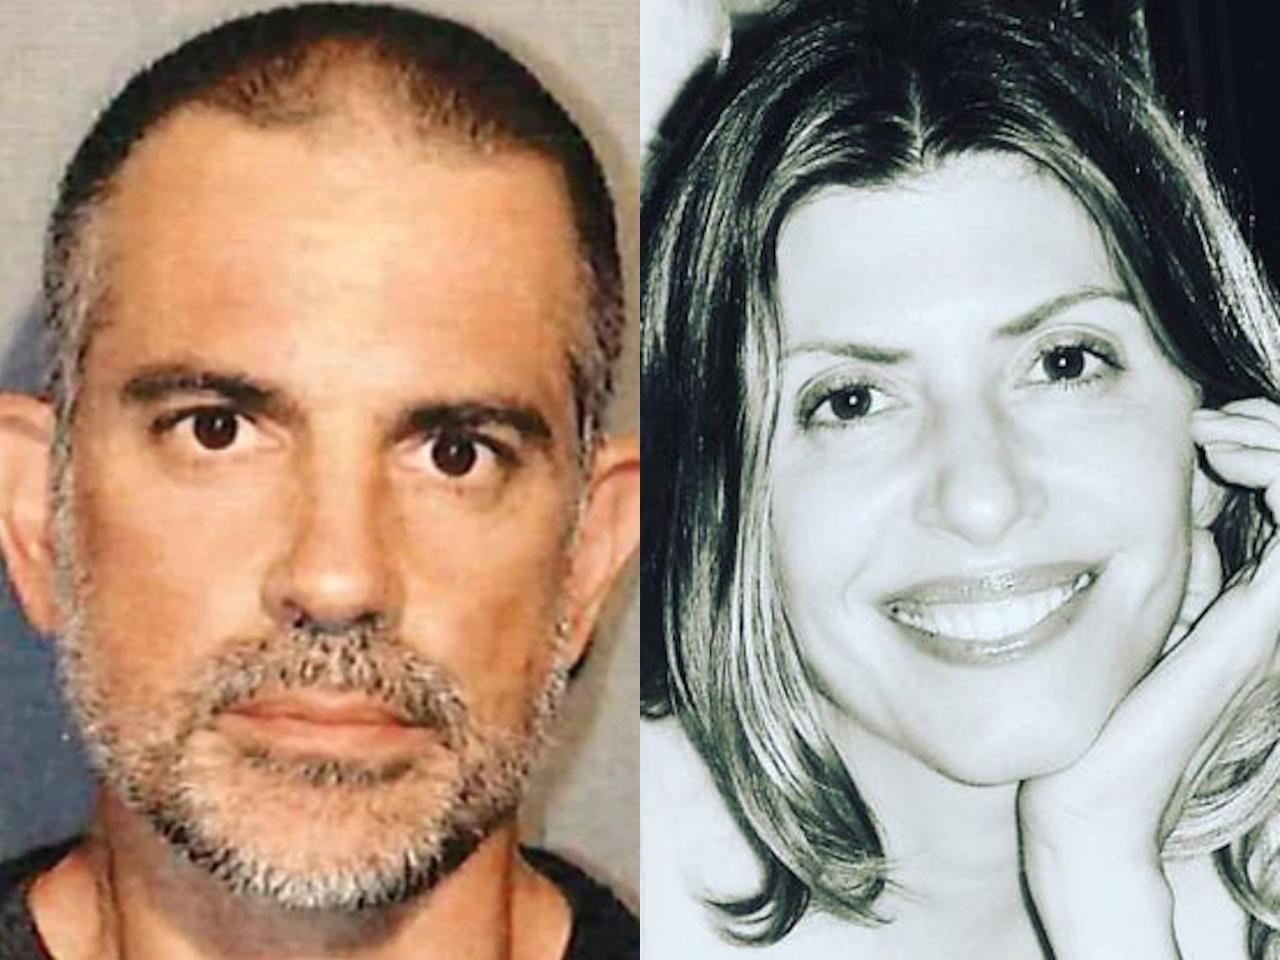 Fotis Dulos Arrested After Wife's DNA Found In Vehicle | Missing | Investigation Discovery1280 x 960